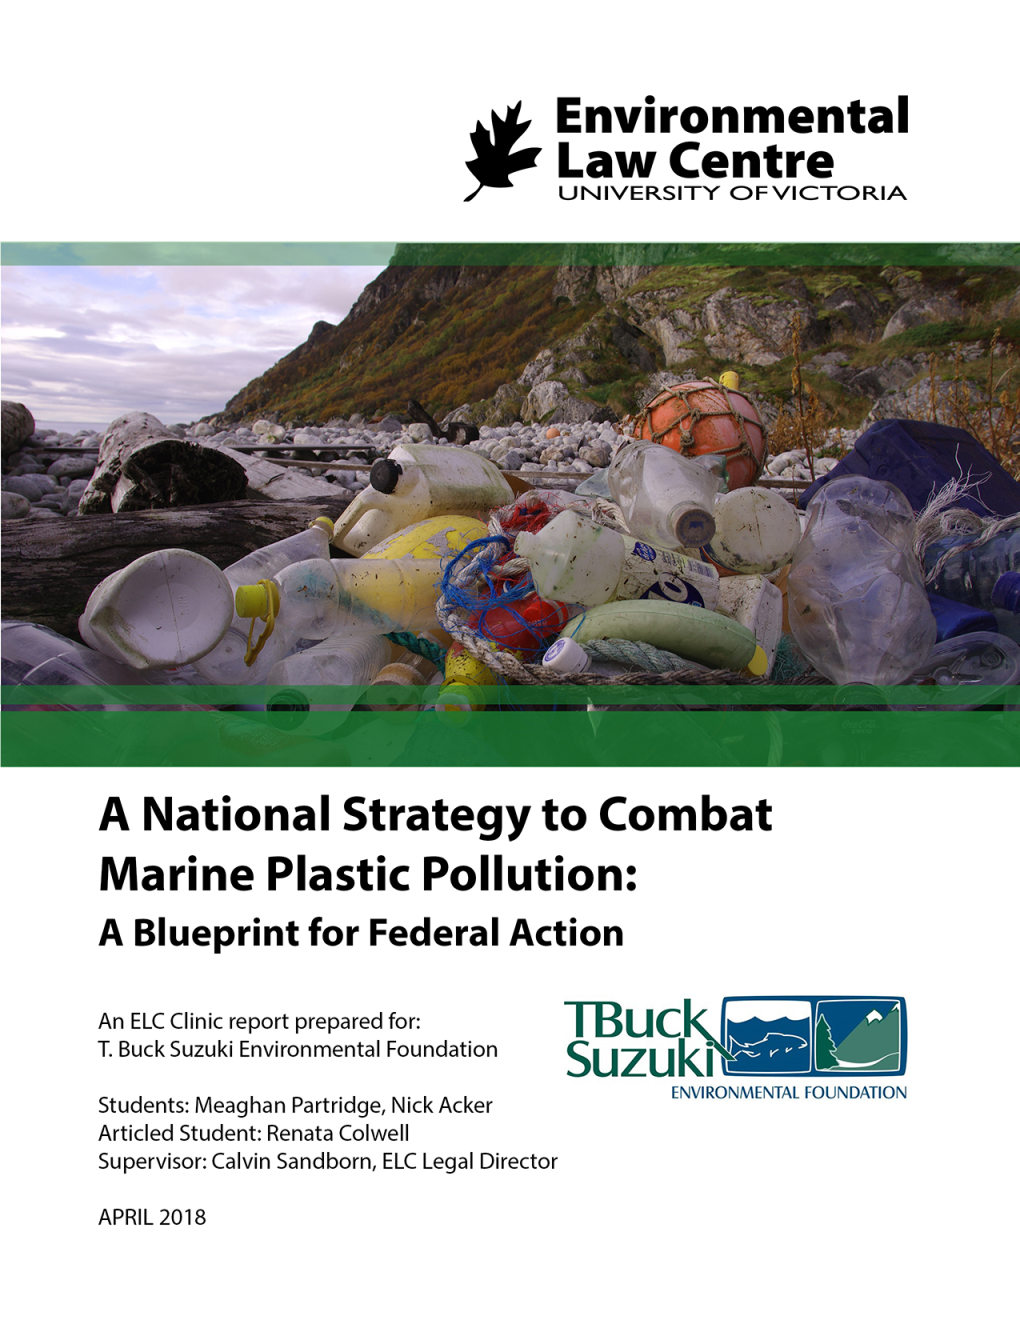 Environmental Law Centre Thanks Kathy Chan and Meinhard Doelle for Their Helpful Feedback on This Strategy